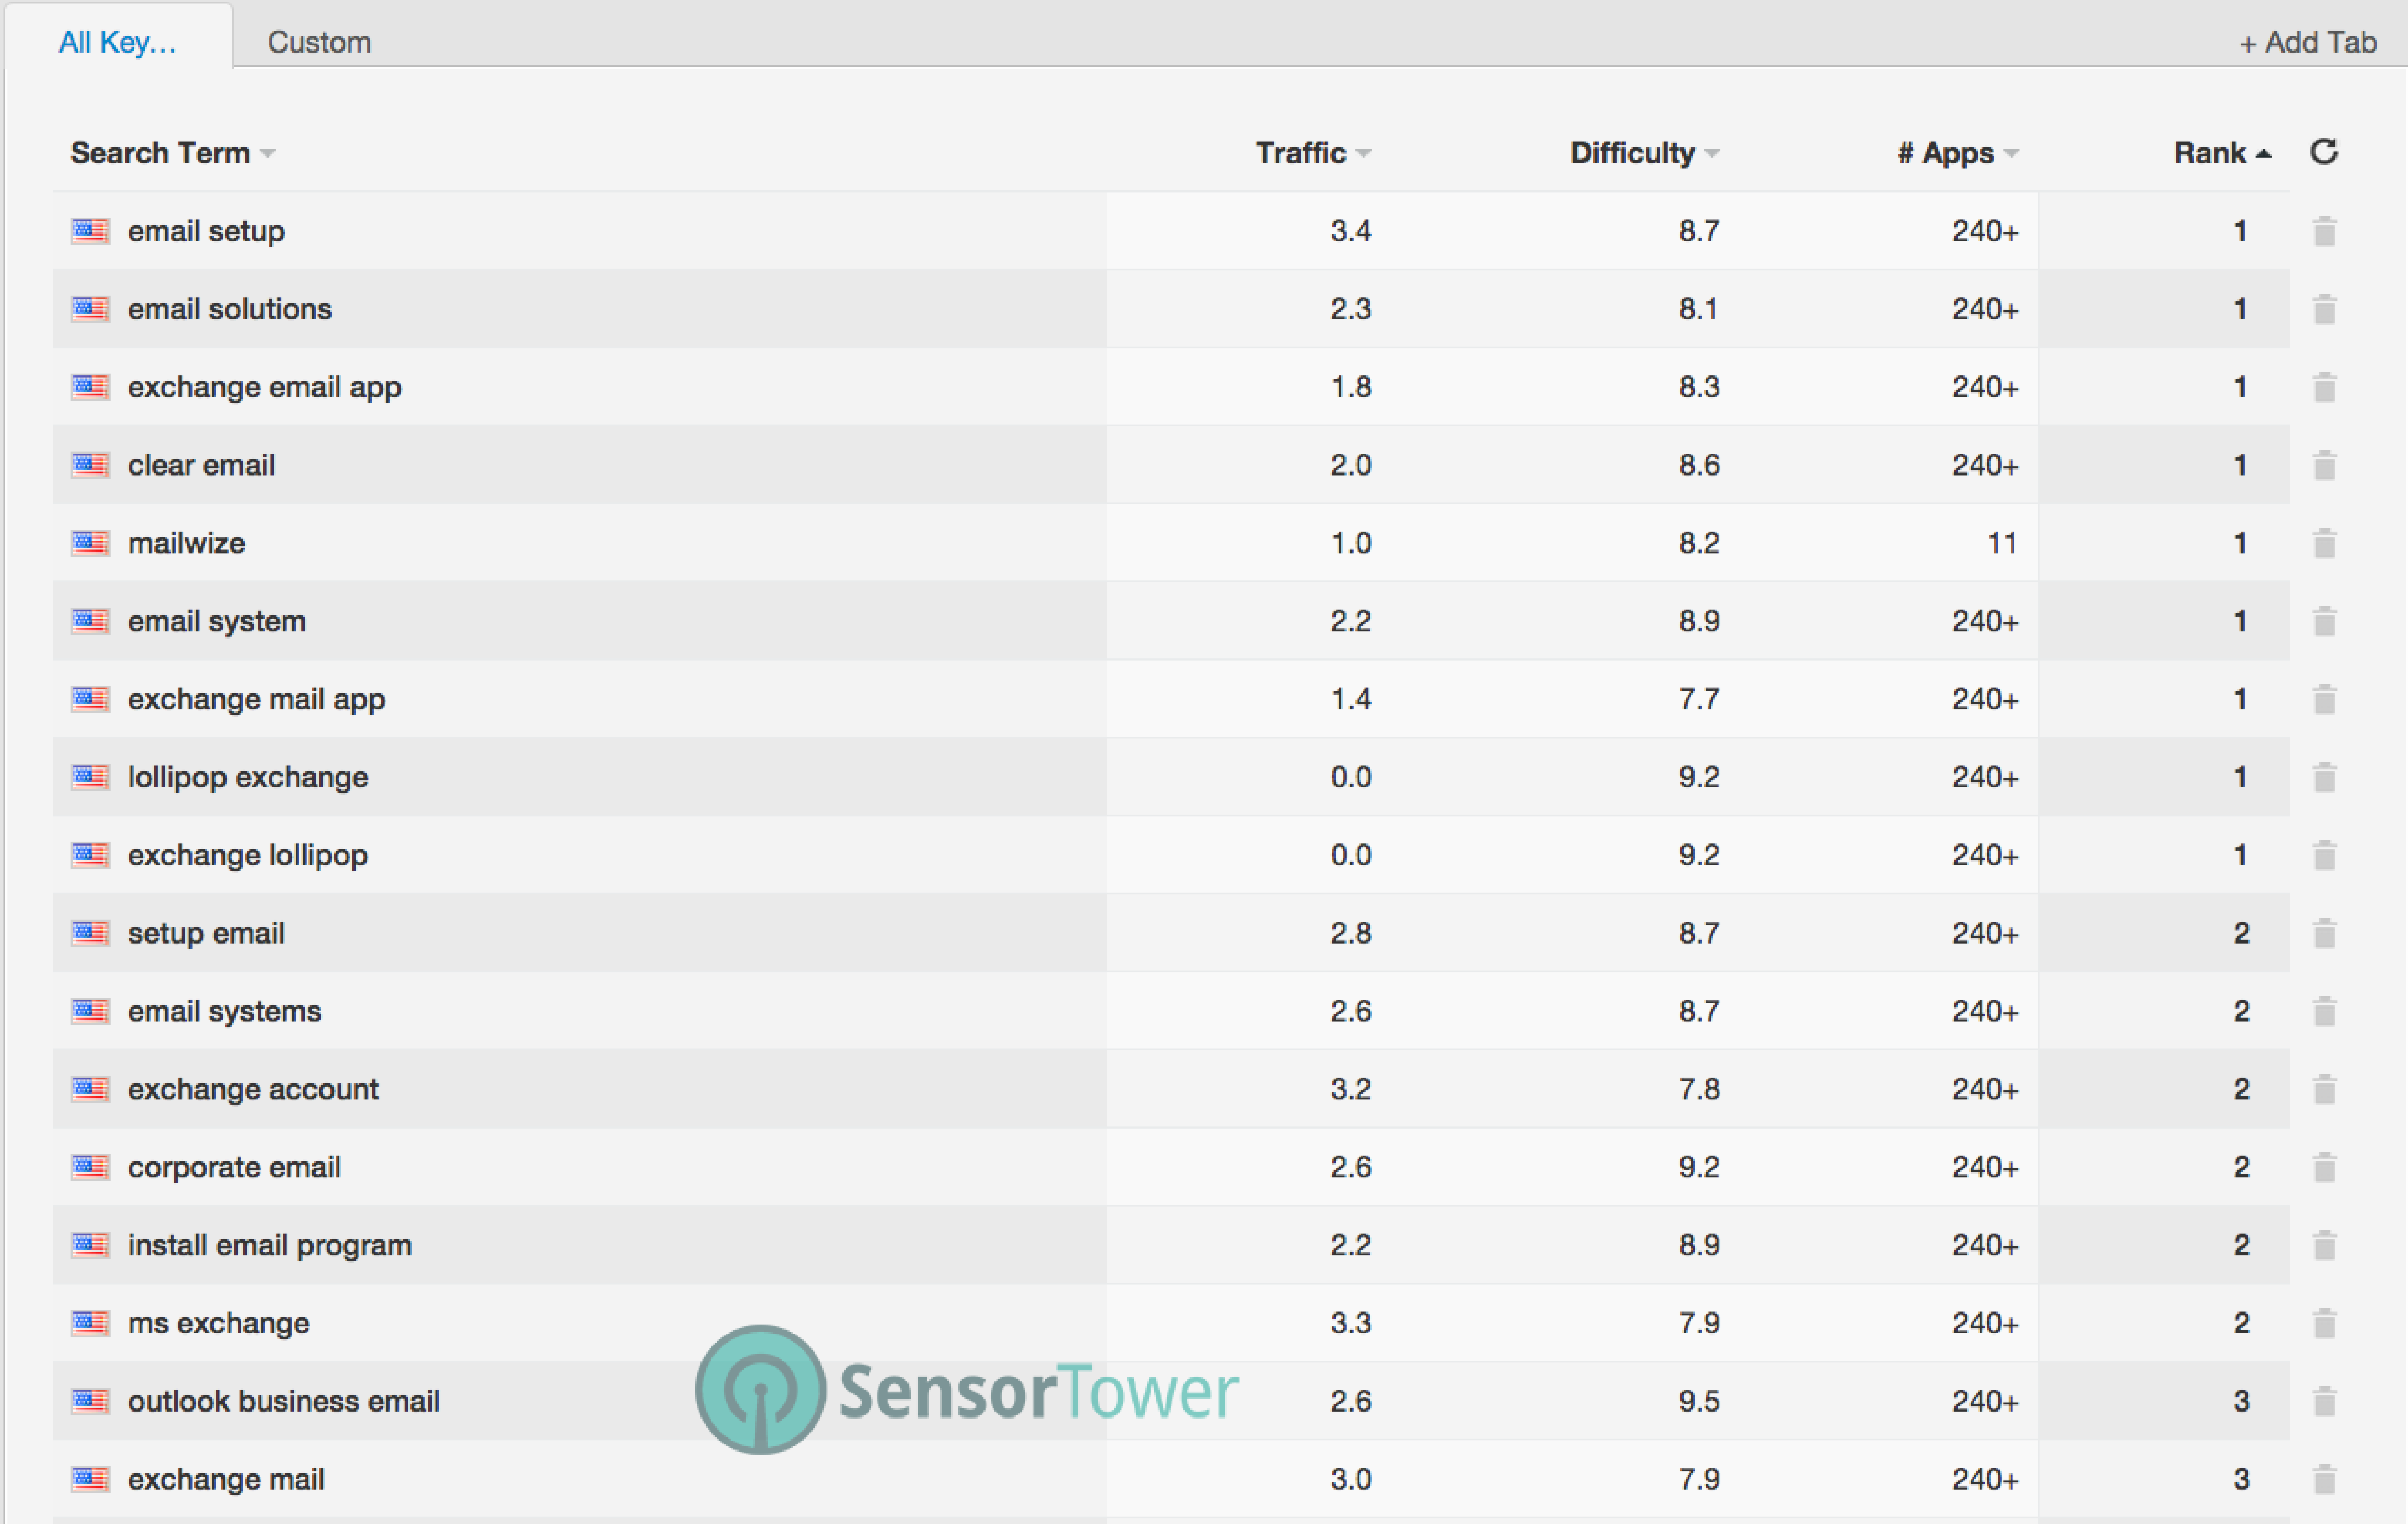 Image Showing Current Keyword Rankings for MailWise App in Sensor Tower